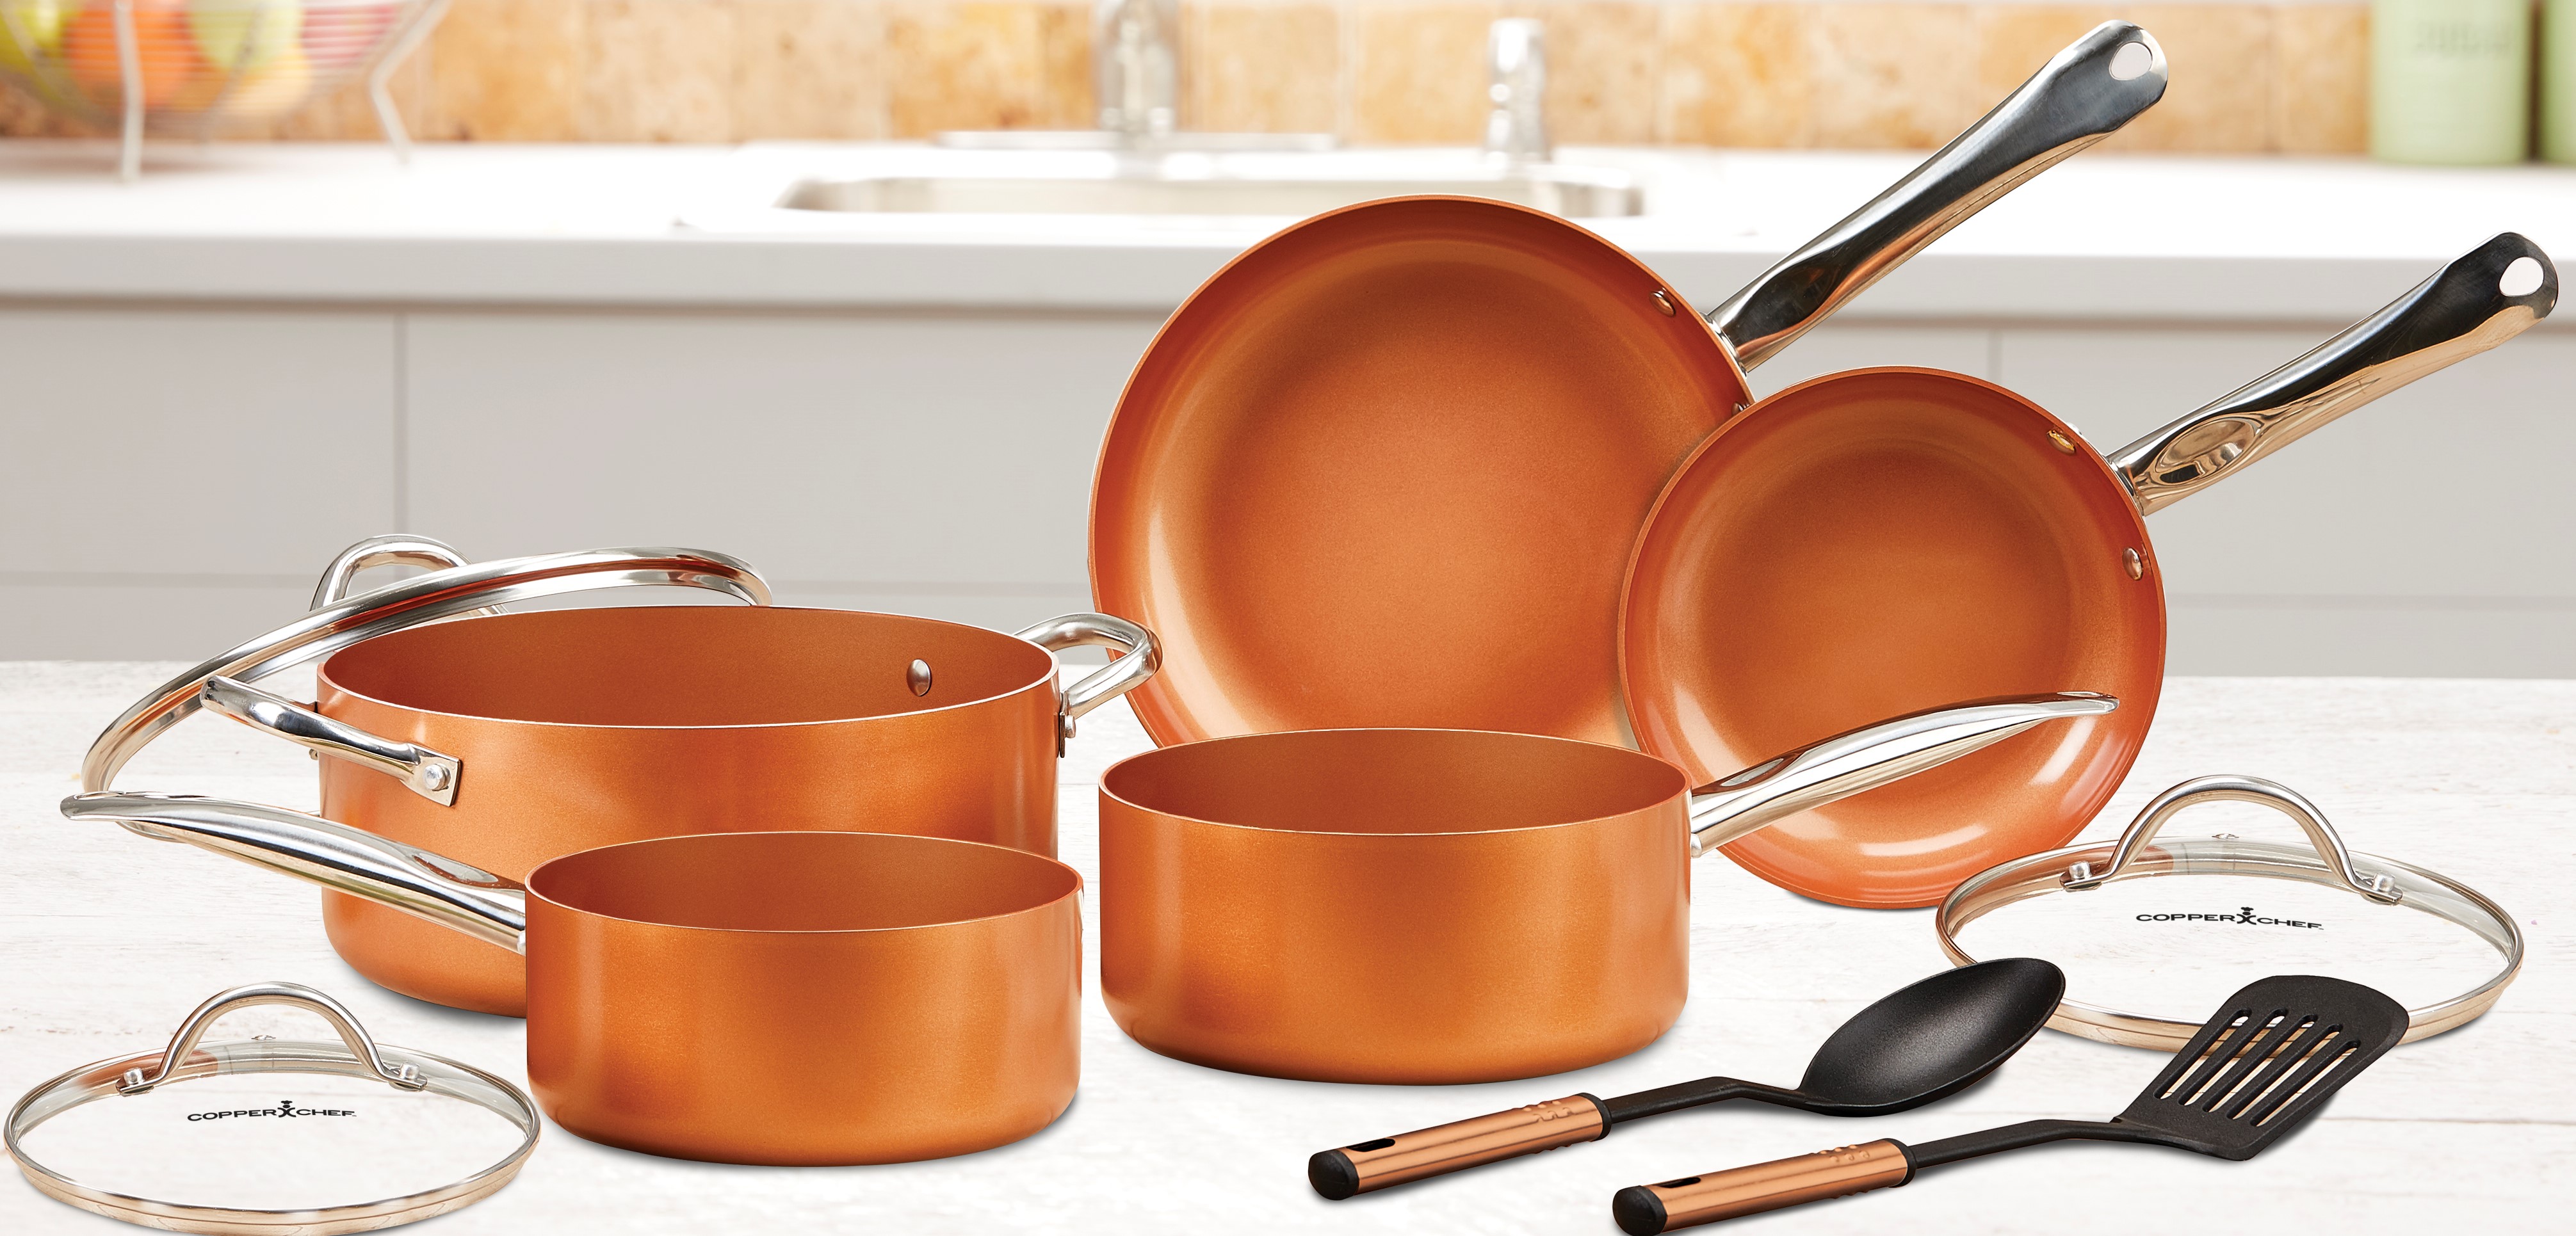 Copper Chef 10 Piece Nonstick Pan Set, with CeramiTech - image 2 of 5